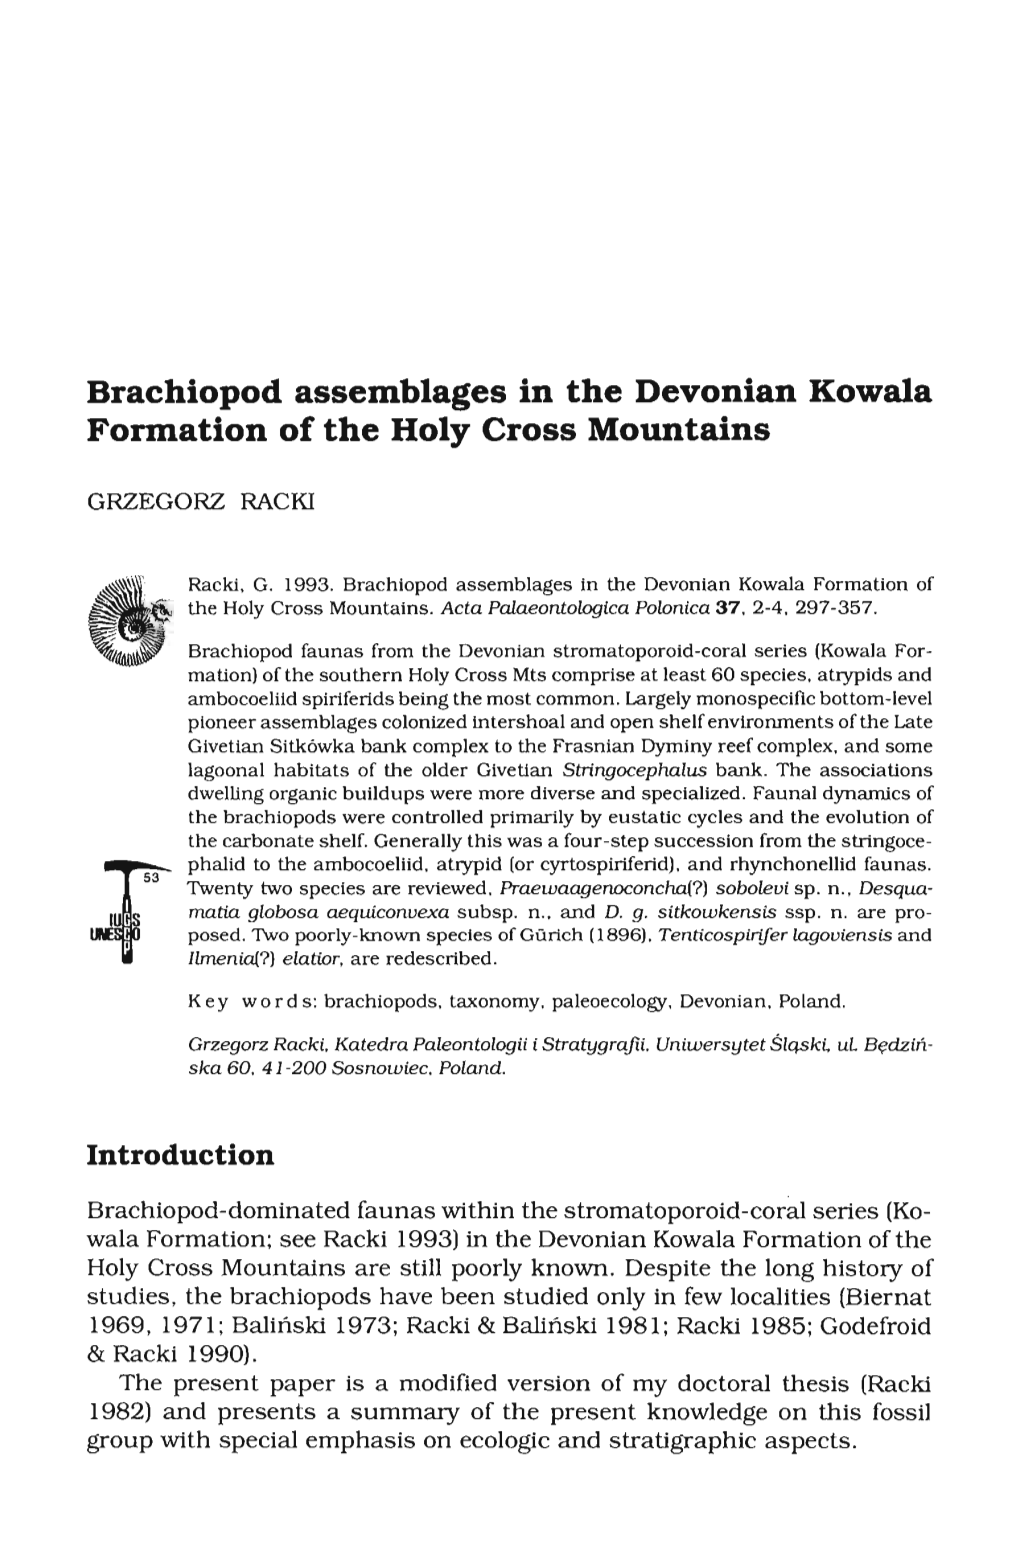 Brachiopod Assemblages in the Devonian Kowala Formation of the Holy Cross Mountains